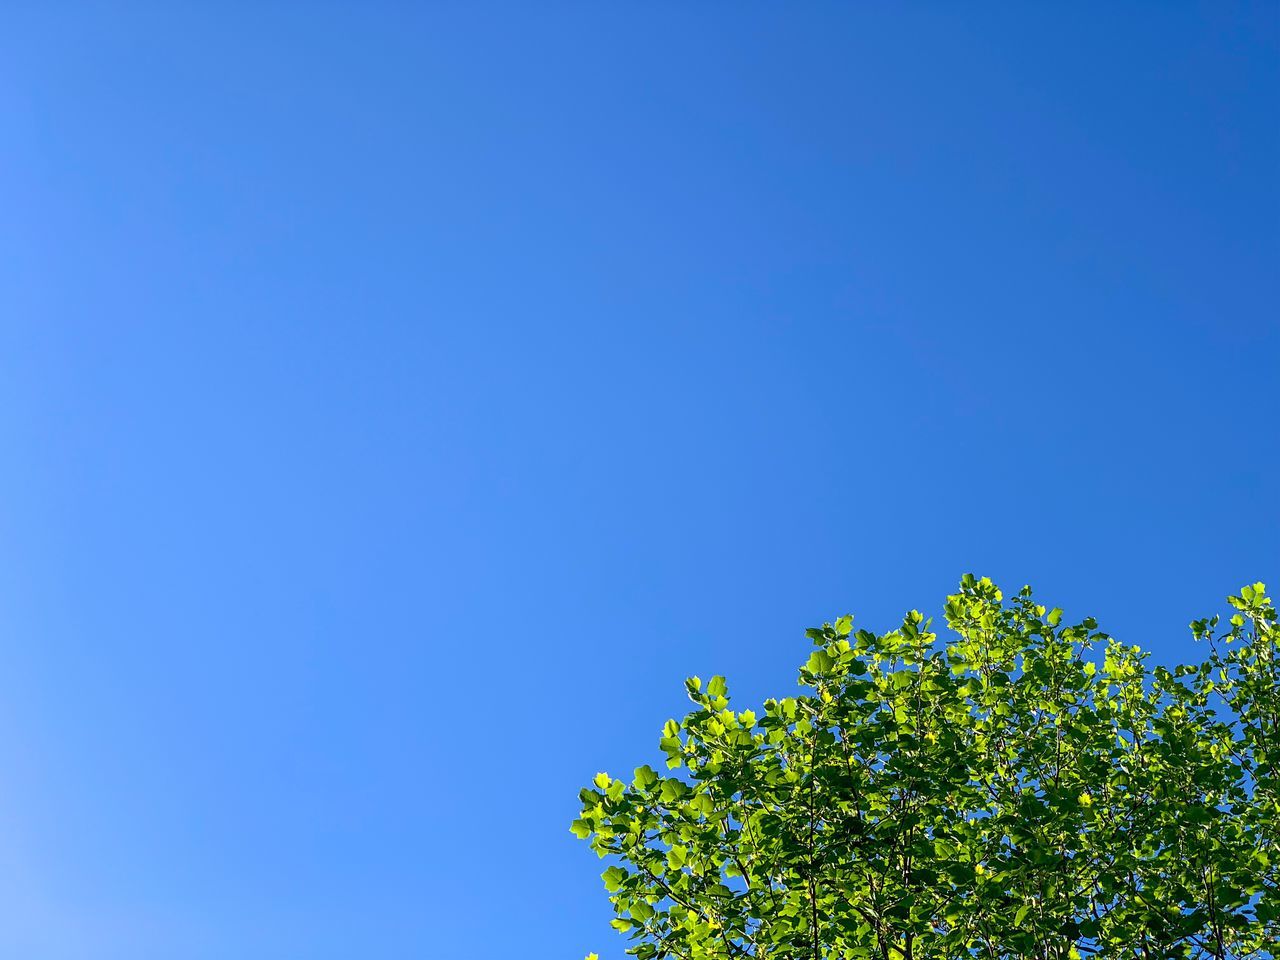 sky, blue, copy space, clear sky, plant, low angle view, tree, beauty in nature, growth, nature, no people, day, green color, tranquility, outdoors, sunlight, branch, scenics - nature, leaf, plant part, treetop